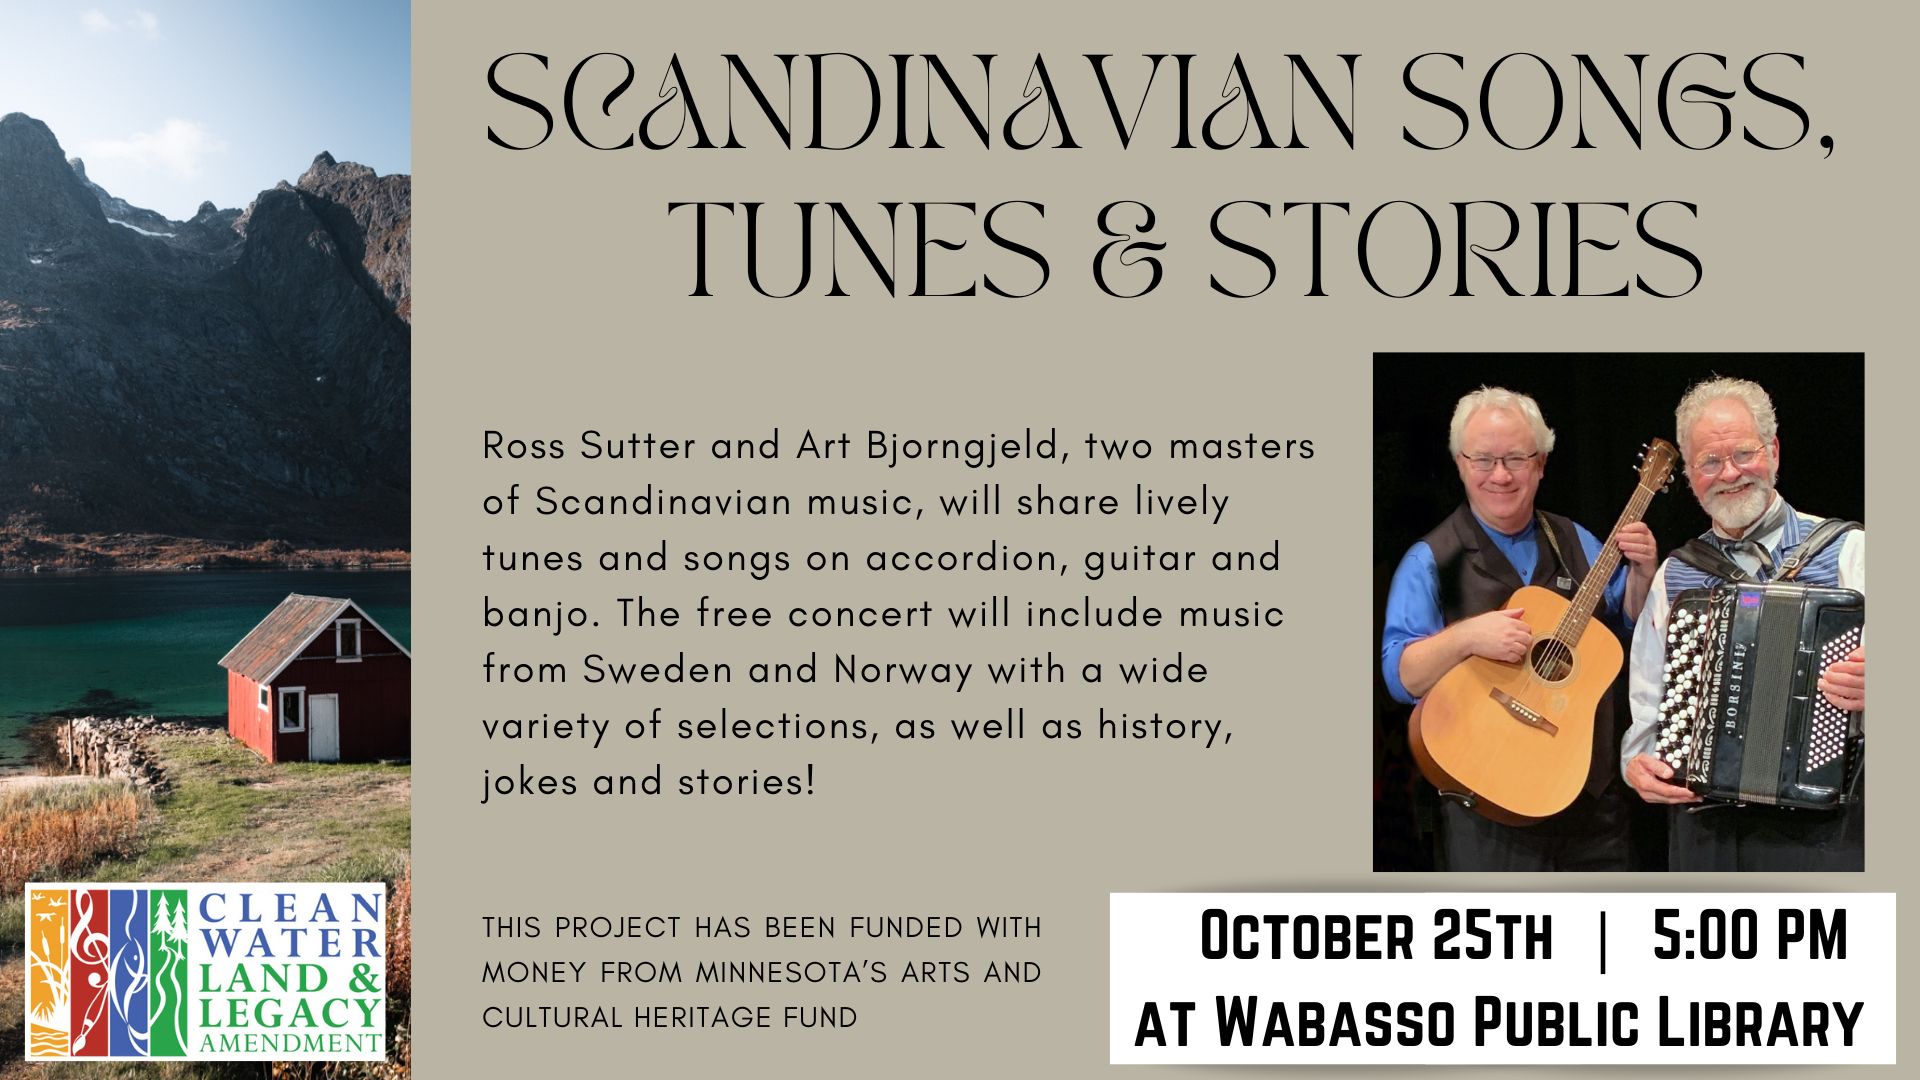 <h1 class="tribe-events-single-event-title">Scandinavian Songs, Tunes & Stories</h1>